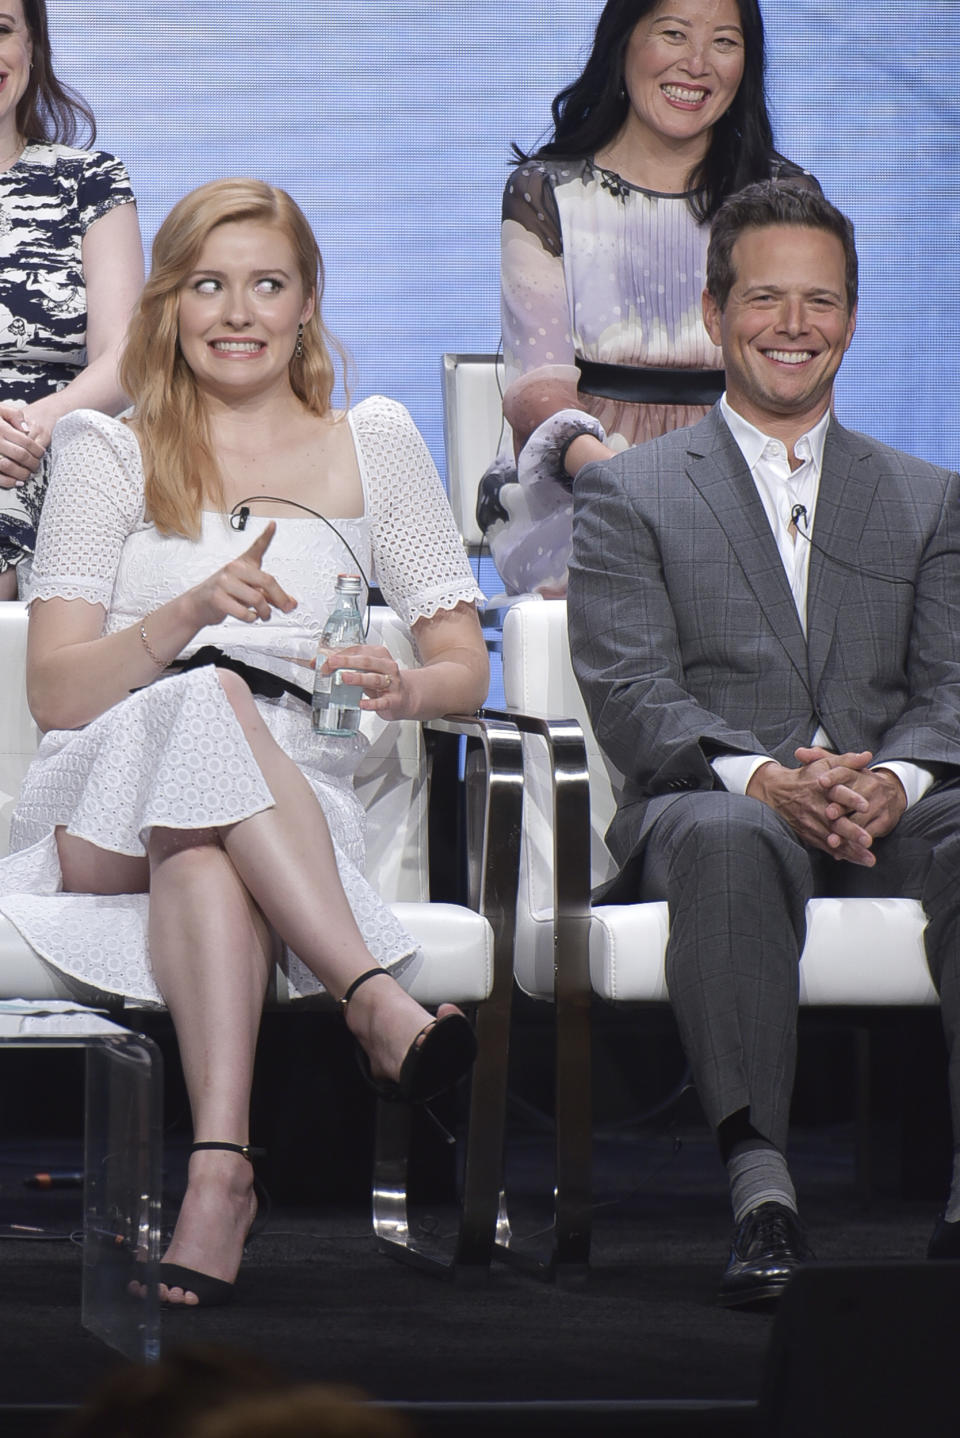 Kennedy McMann, left, and Scott Wolf participate in The CW "Nancy Drew" panel during the Summer 2019 Television Critics Association Press Tour at the Beverly Hilton Hotel on Sunday, Aug. 4, 2019, in Beverly Hills, Calif. (Photo by Richard Shotwell/Invision/AP)